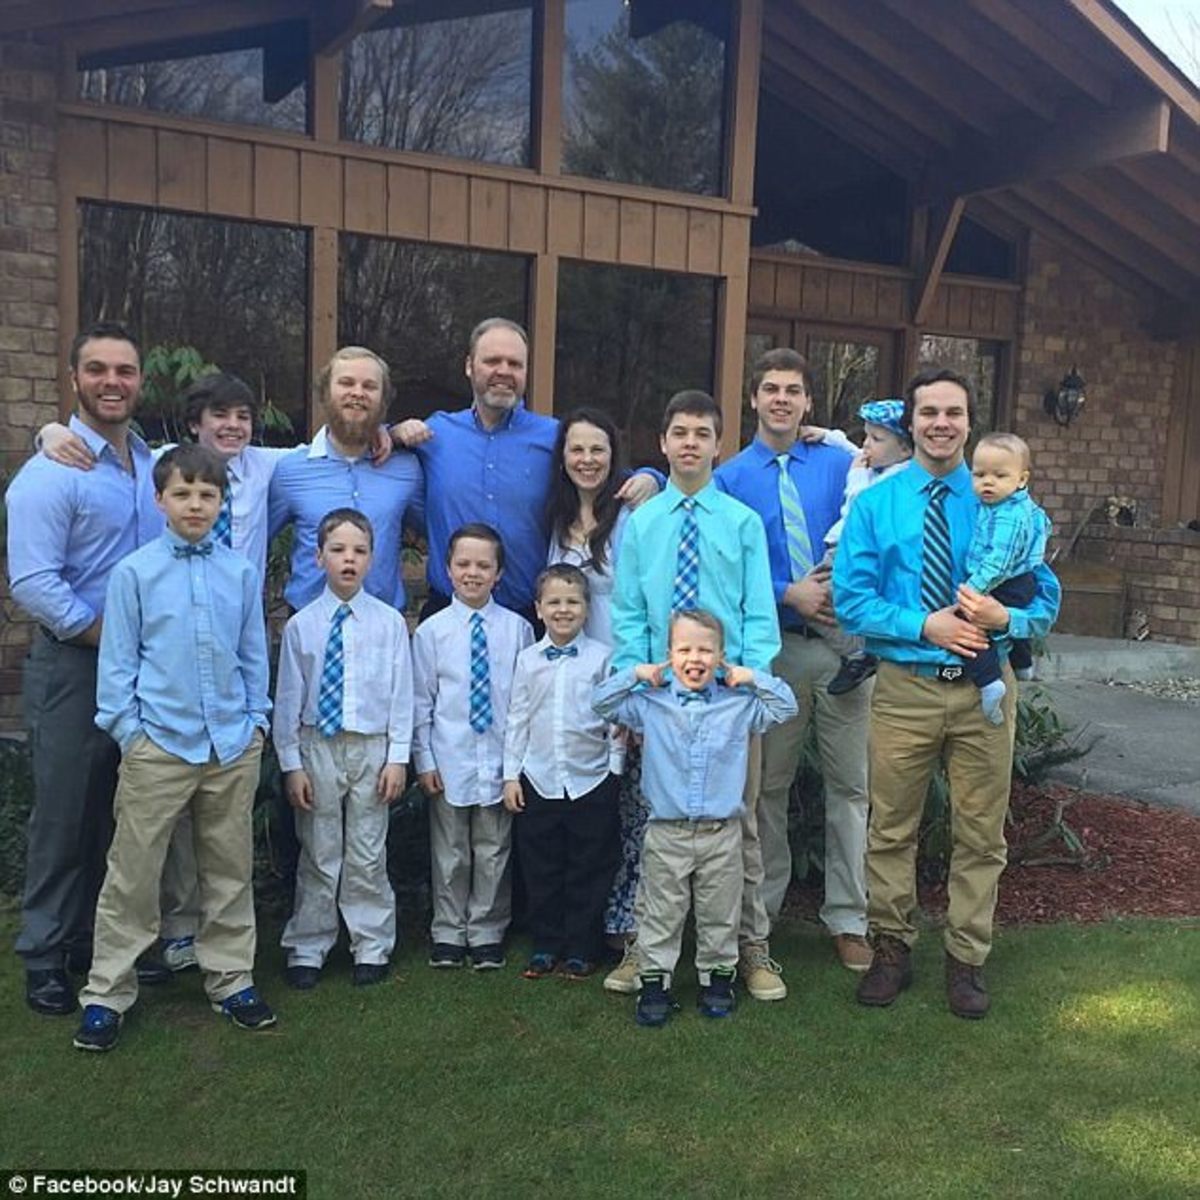 Couple Has 14 Boys and No Girls